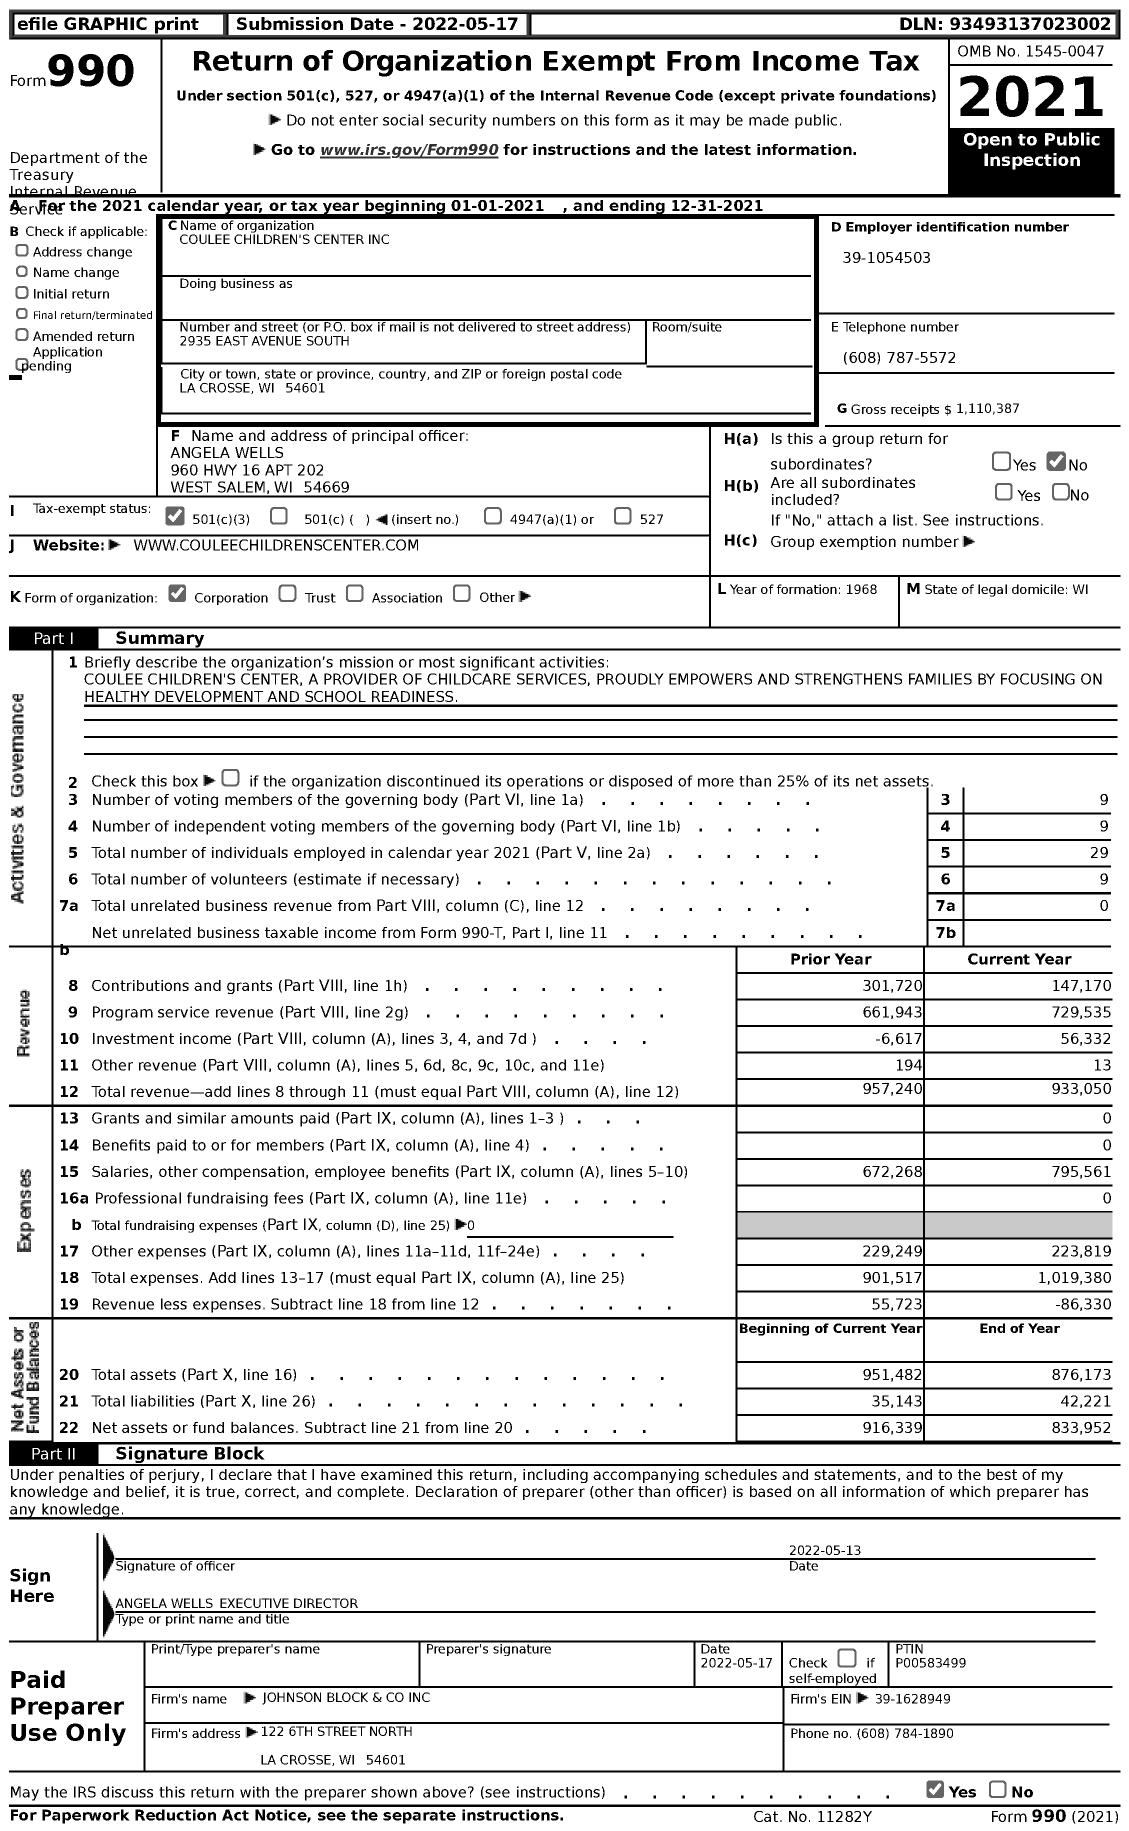 Image of first page of 2021 Form 990 for Coulee Children's Center